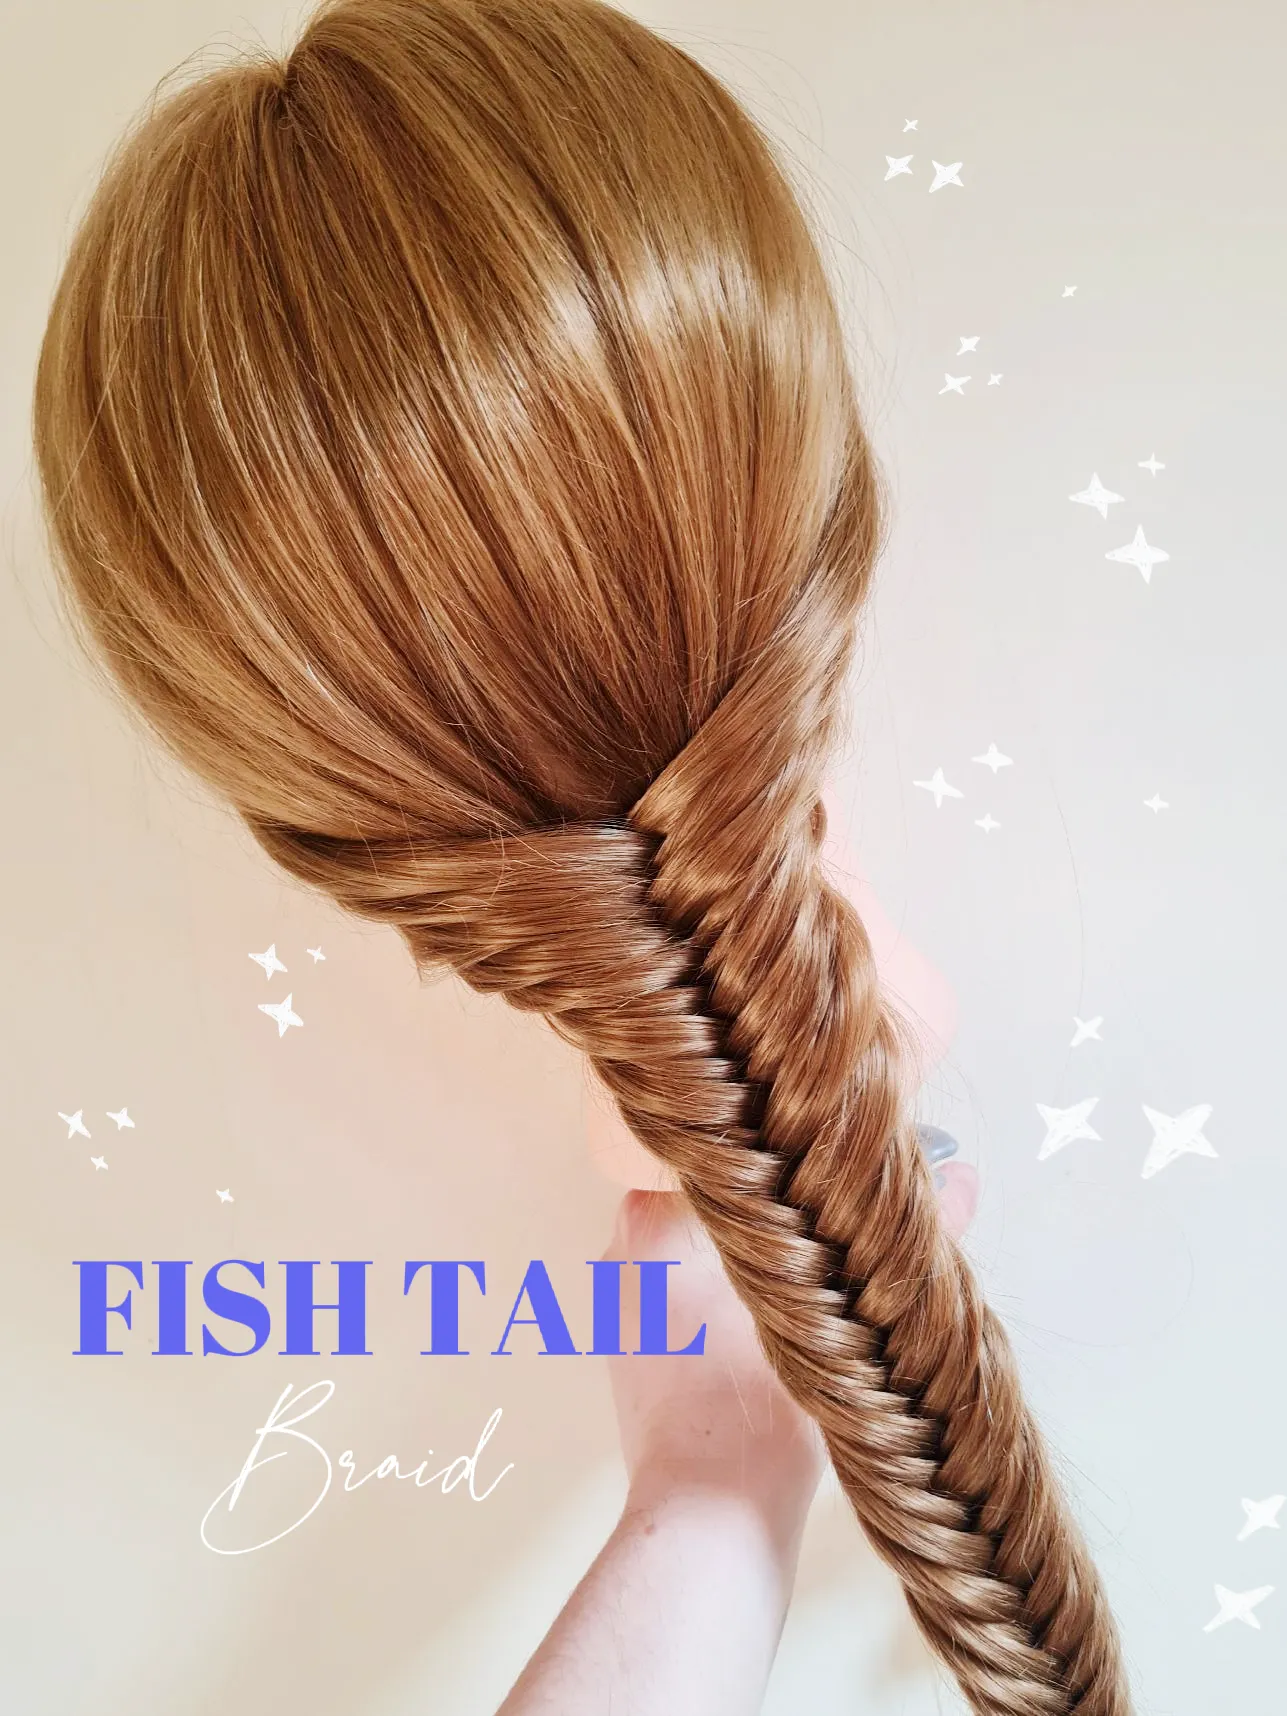 FISH TAIL BRAID 🫶✨, Gallery posted by Life of Chlo 🌸